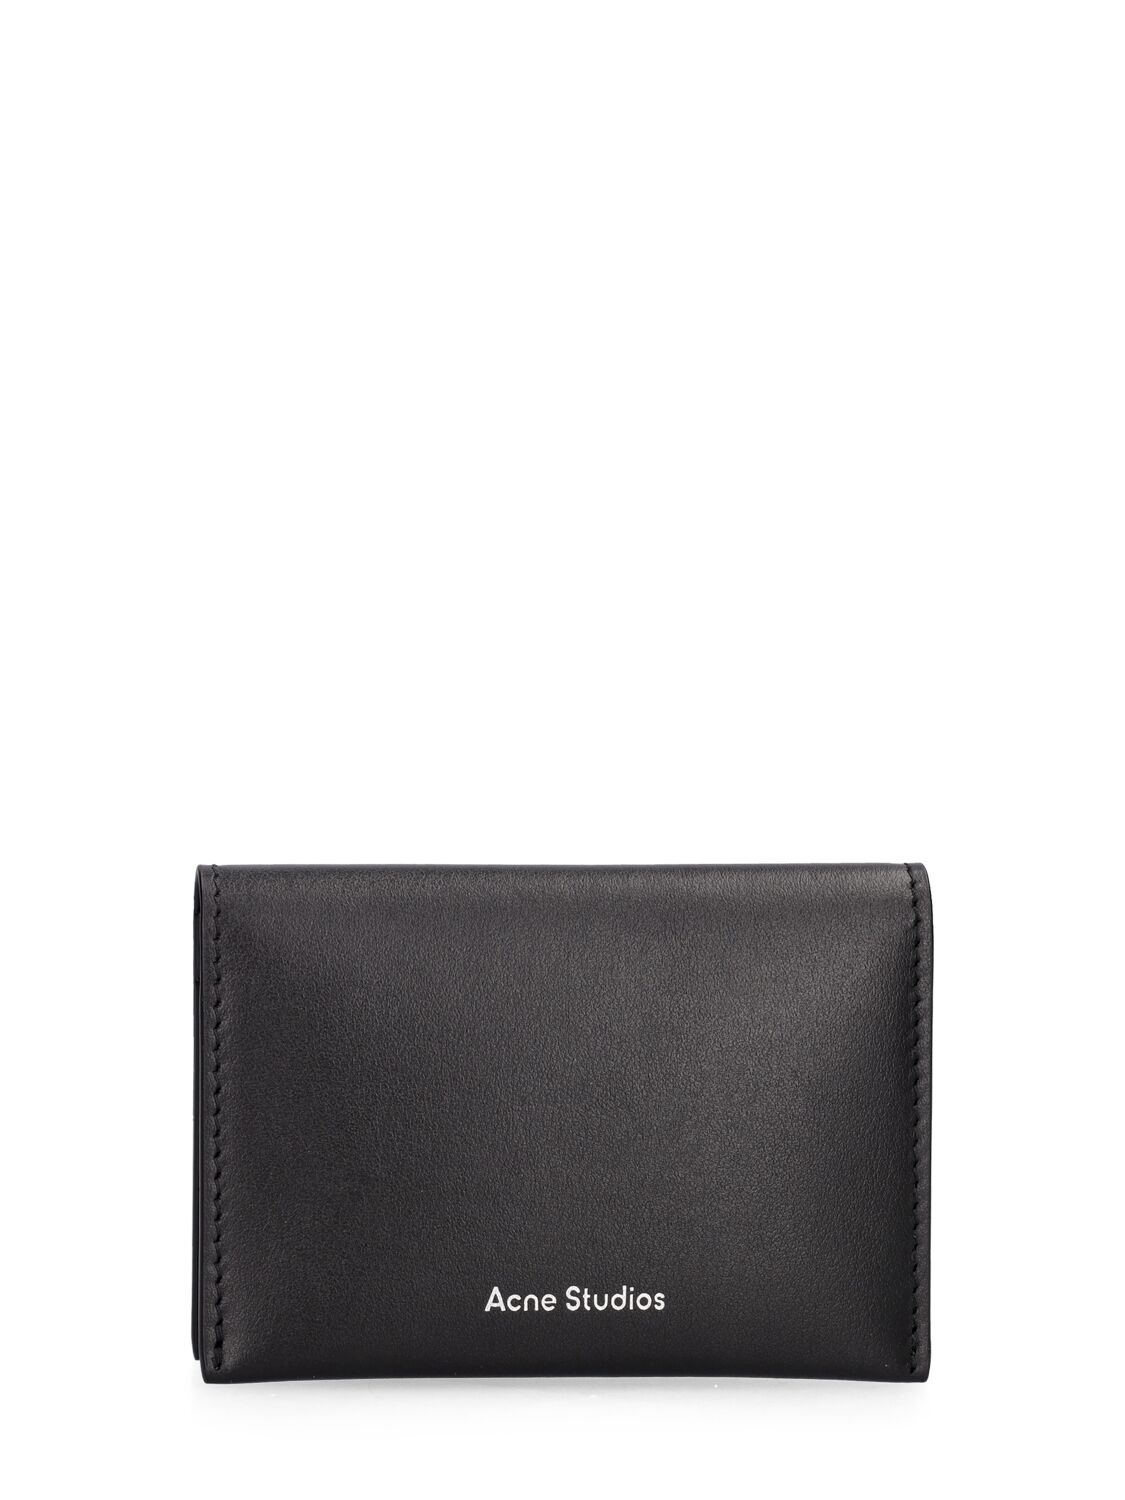 Image of Flap Leather Card Holder